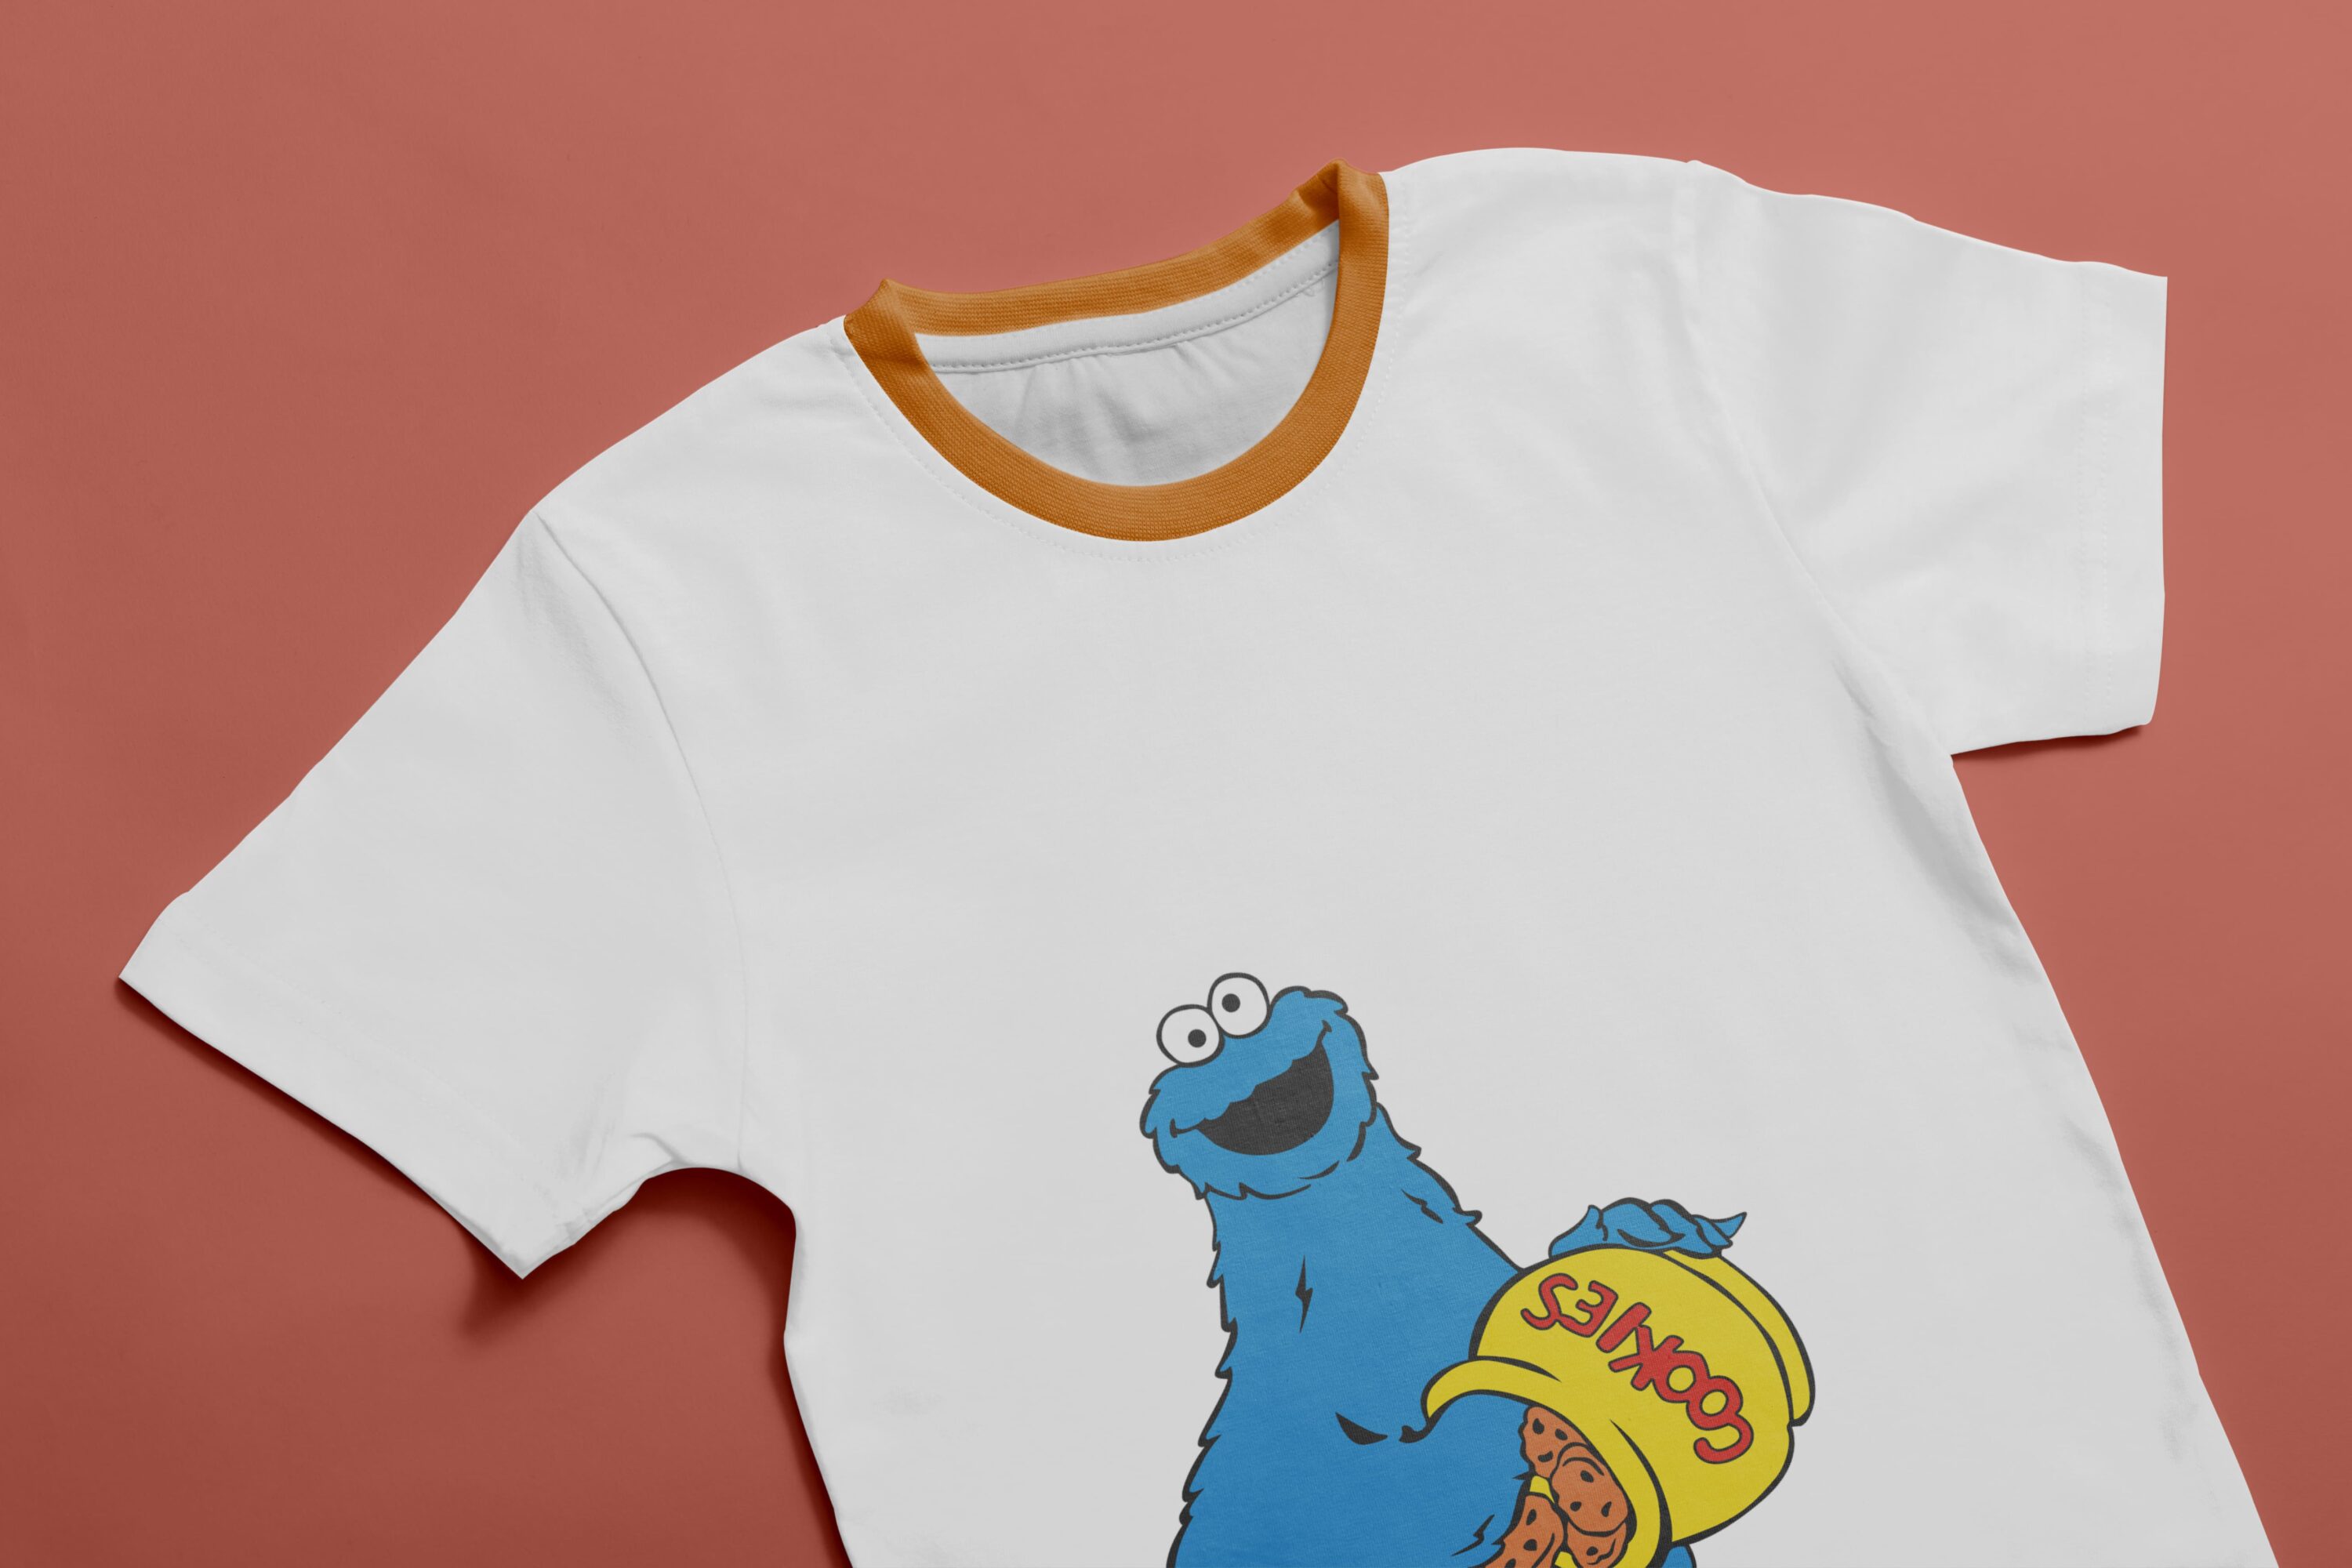 White T-shirt with orange collar and an image of a character - Cookie Monster, holding a yellow cookie jar.